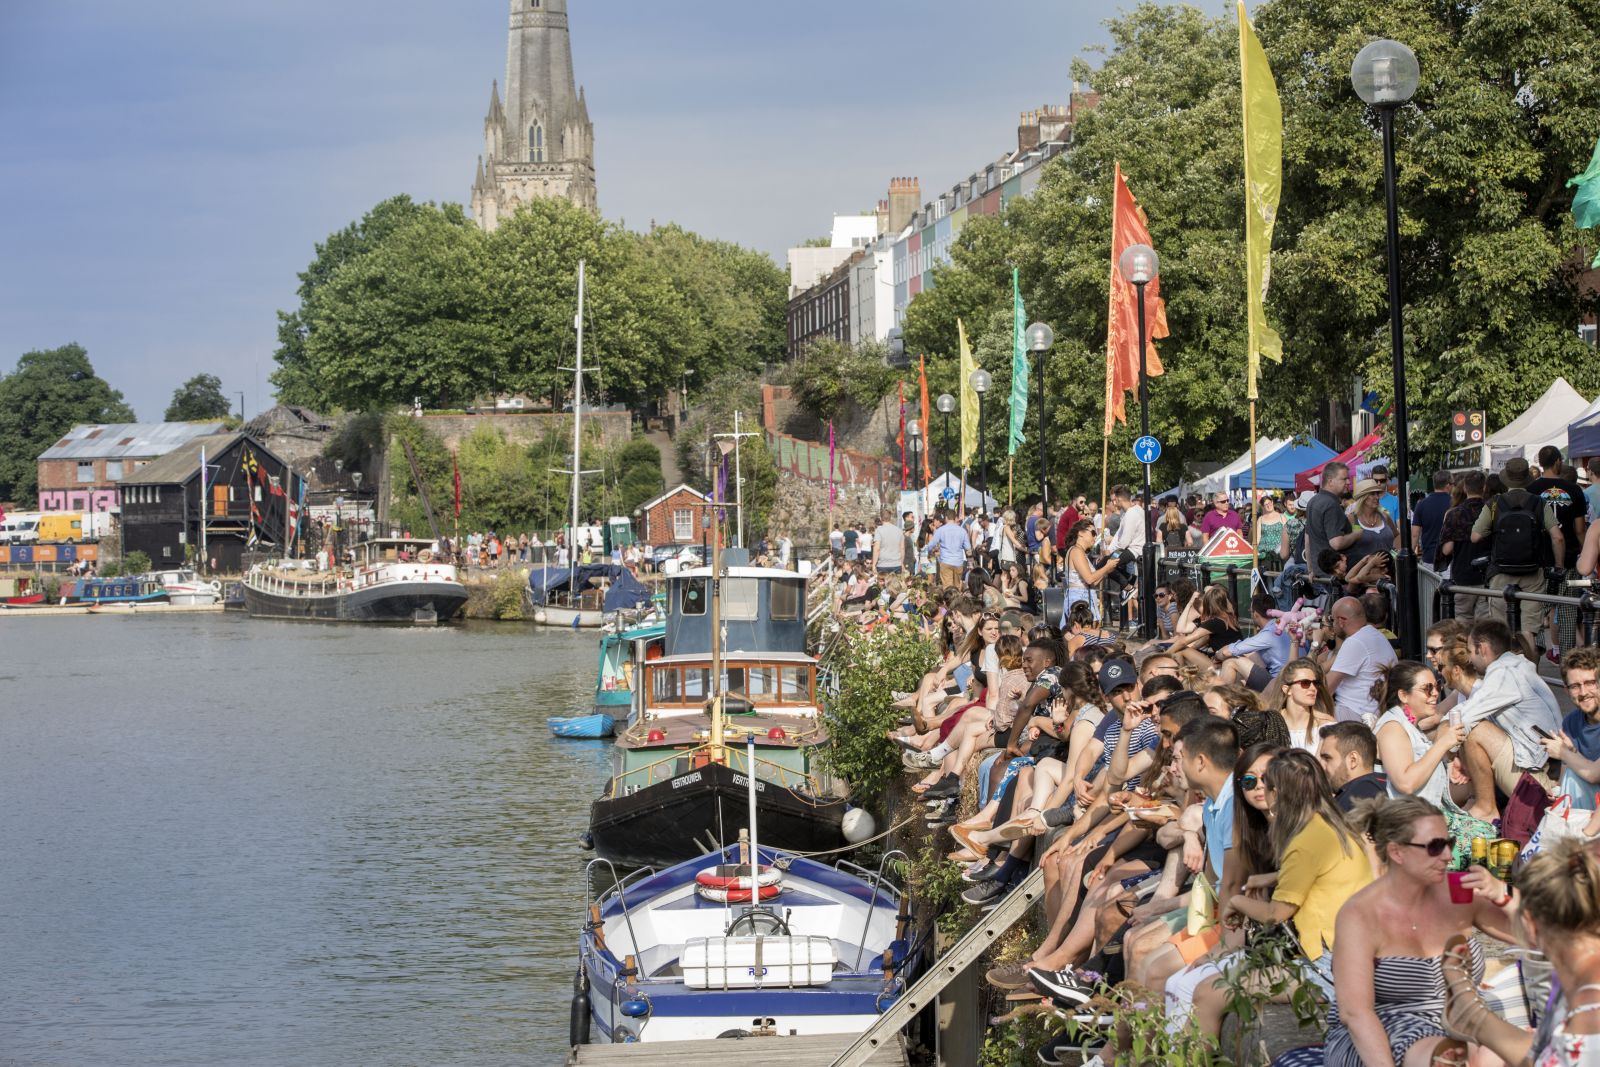 Bristol Harbour Festival's 50th Anniversary celebrations are set to attract thousands of visitors to central Bristol this summer. Photo: Paul Box